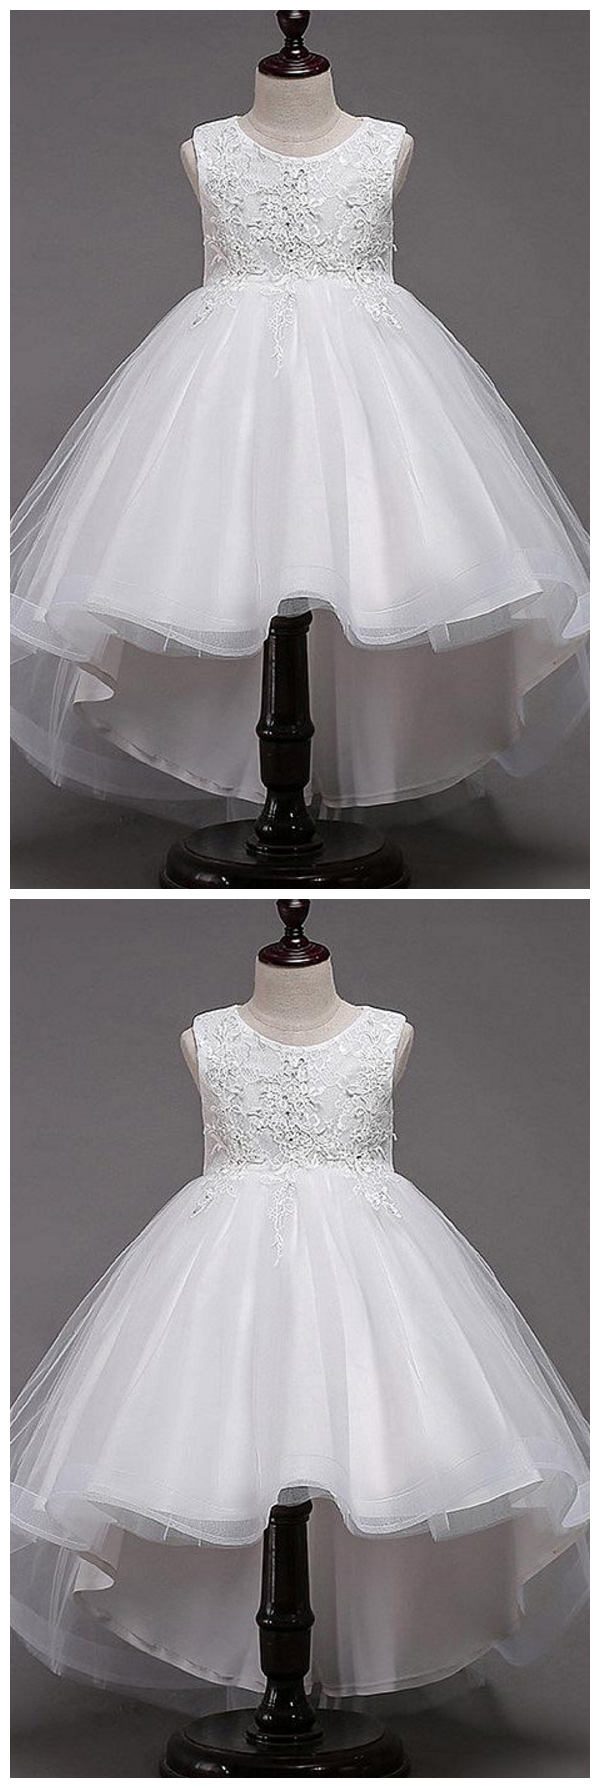 Tulle Lace Jewel Neckline Hi-lo Ball Gown Flower Girl Dress